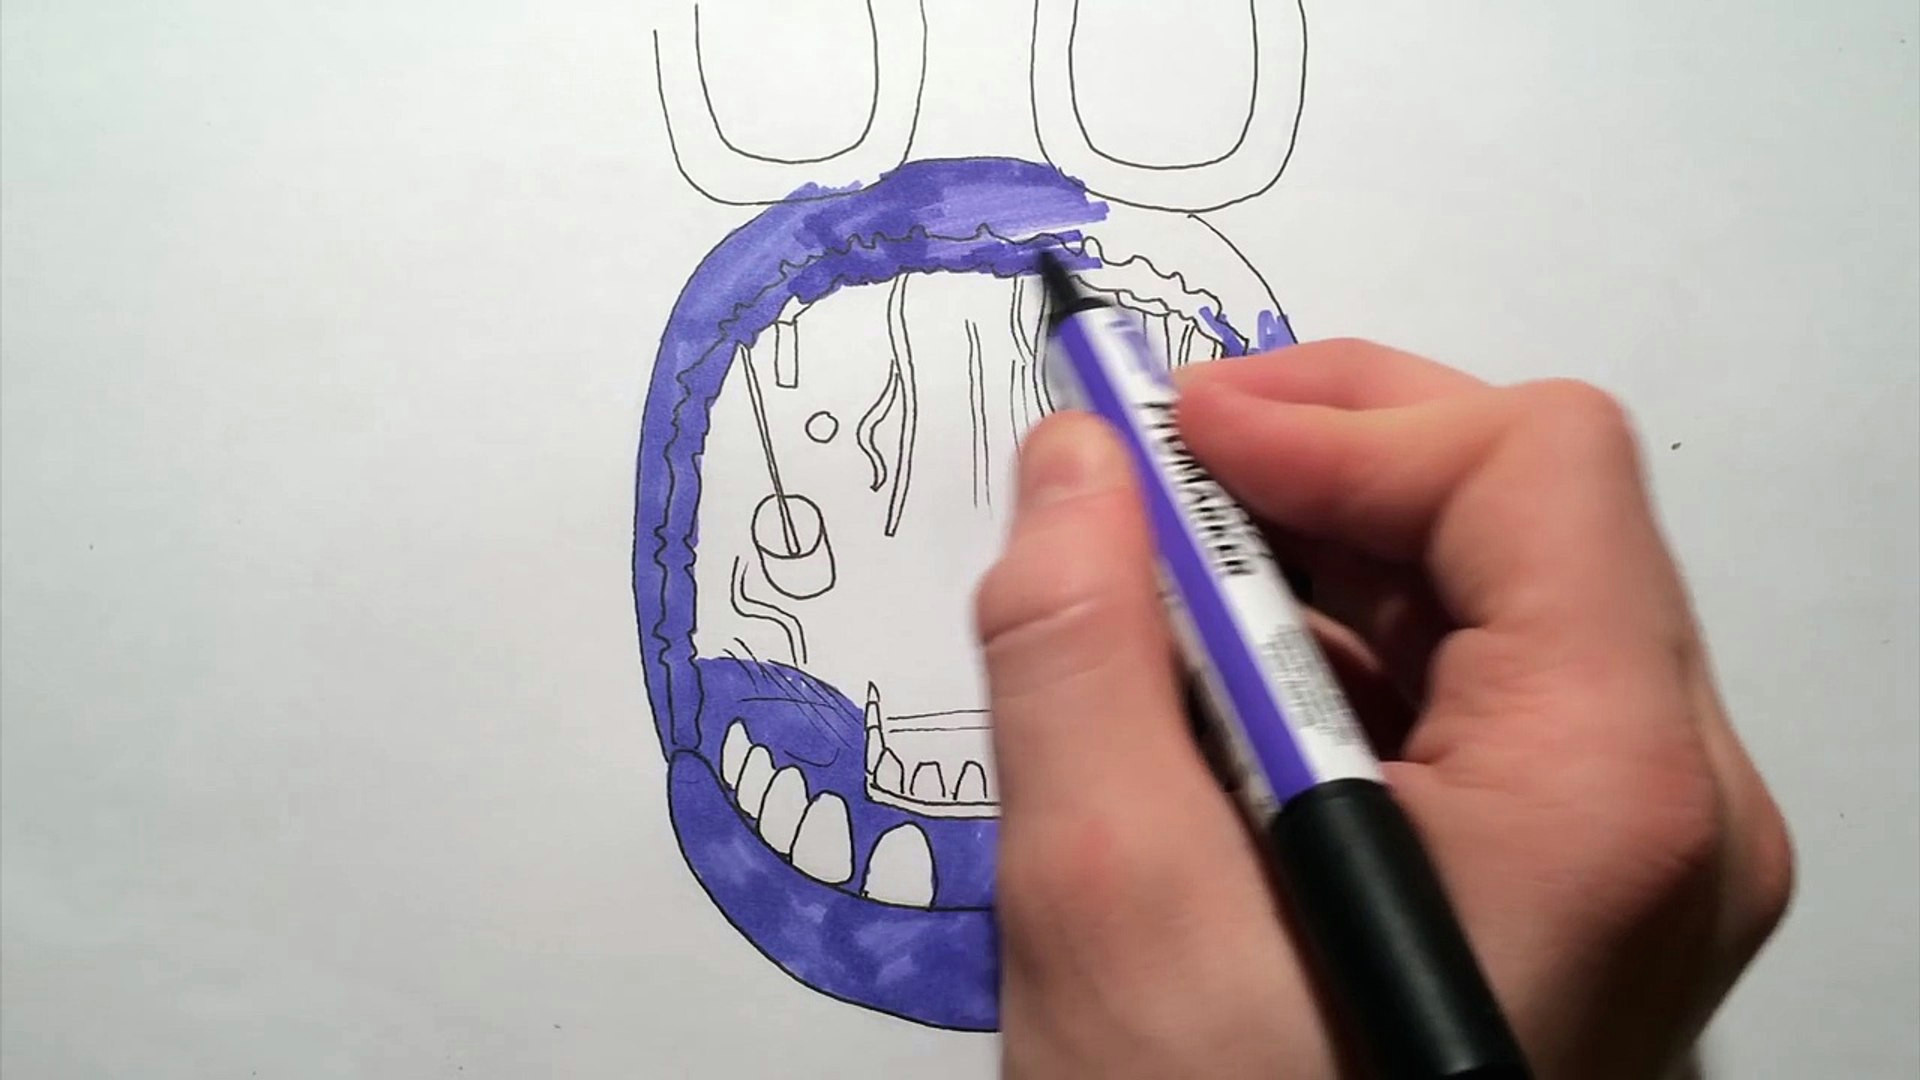 Easy Fnaf Drawings How to Draw withered Bonnie Jumpscare From Five Nights at Freddys Fnaf Drawing Lesson